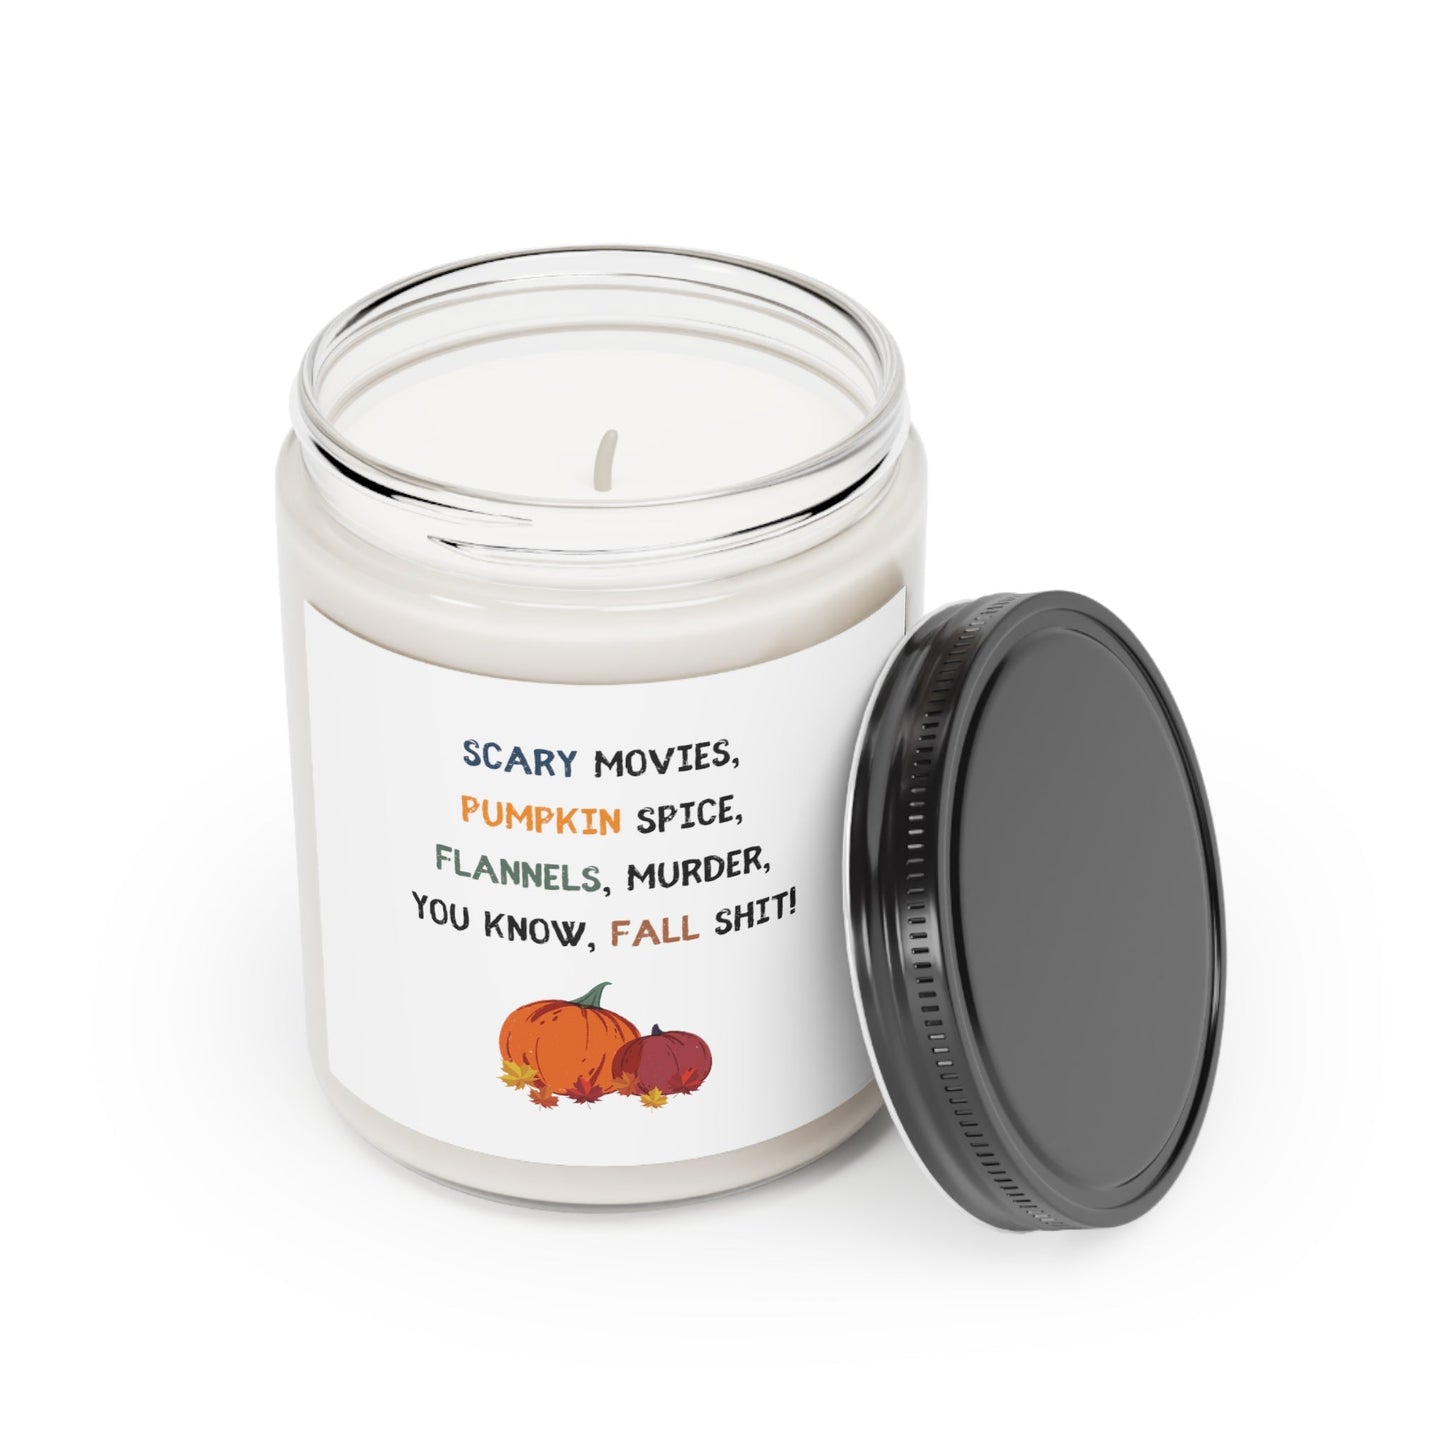 Get trendy with Fall things Scented Candle, 9oz - Home Decor available at Good Gift Company. Grab yours for $18.65 today!